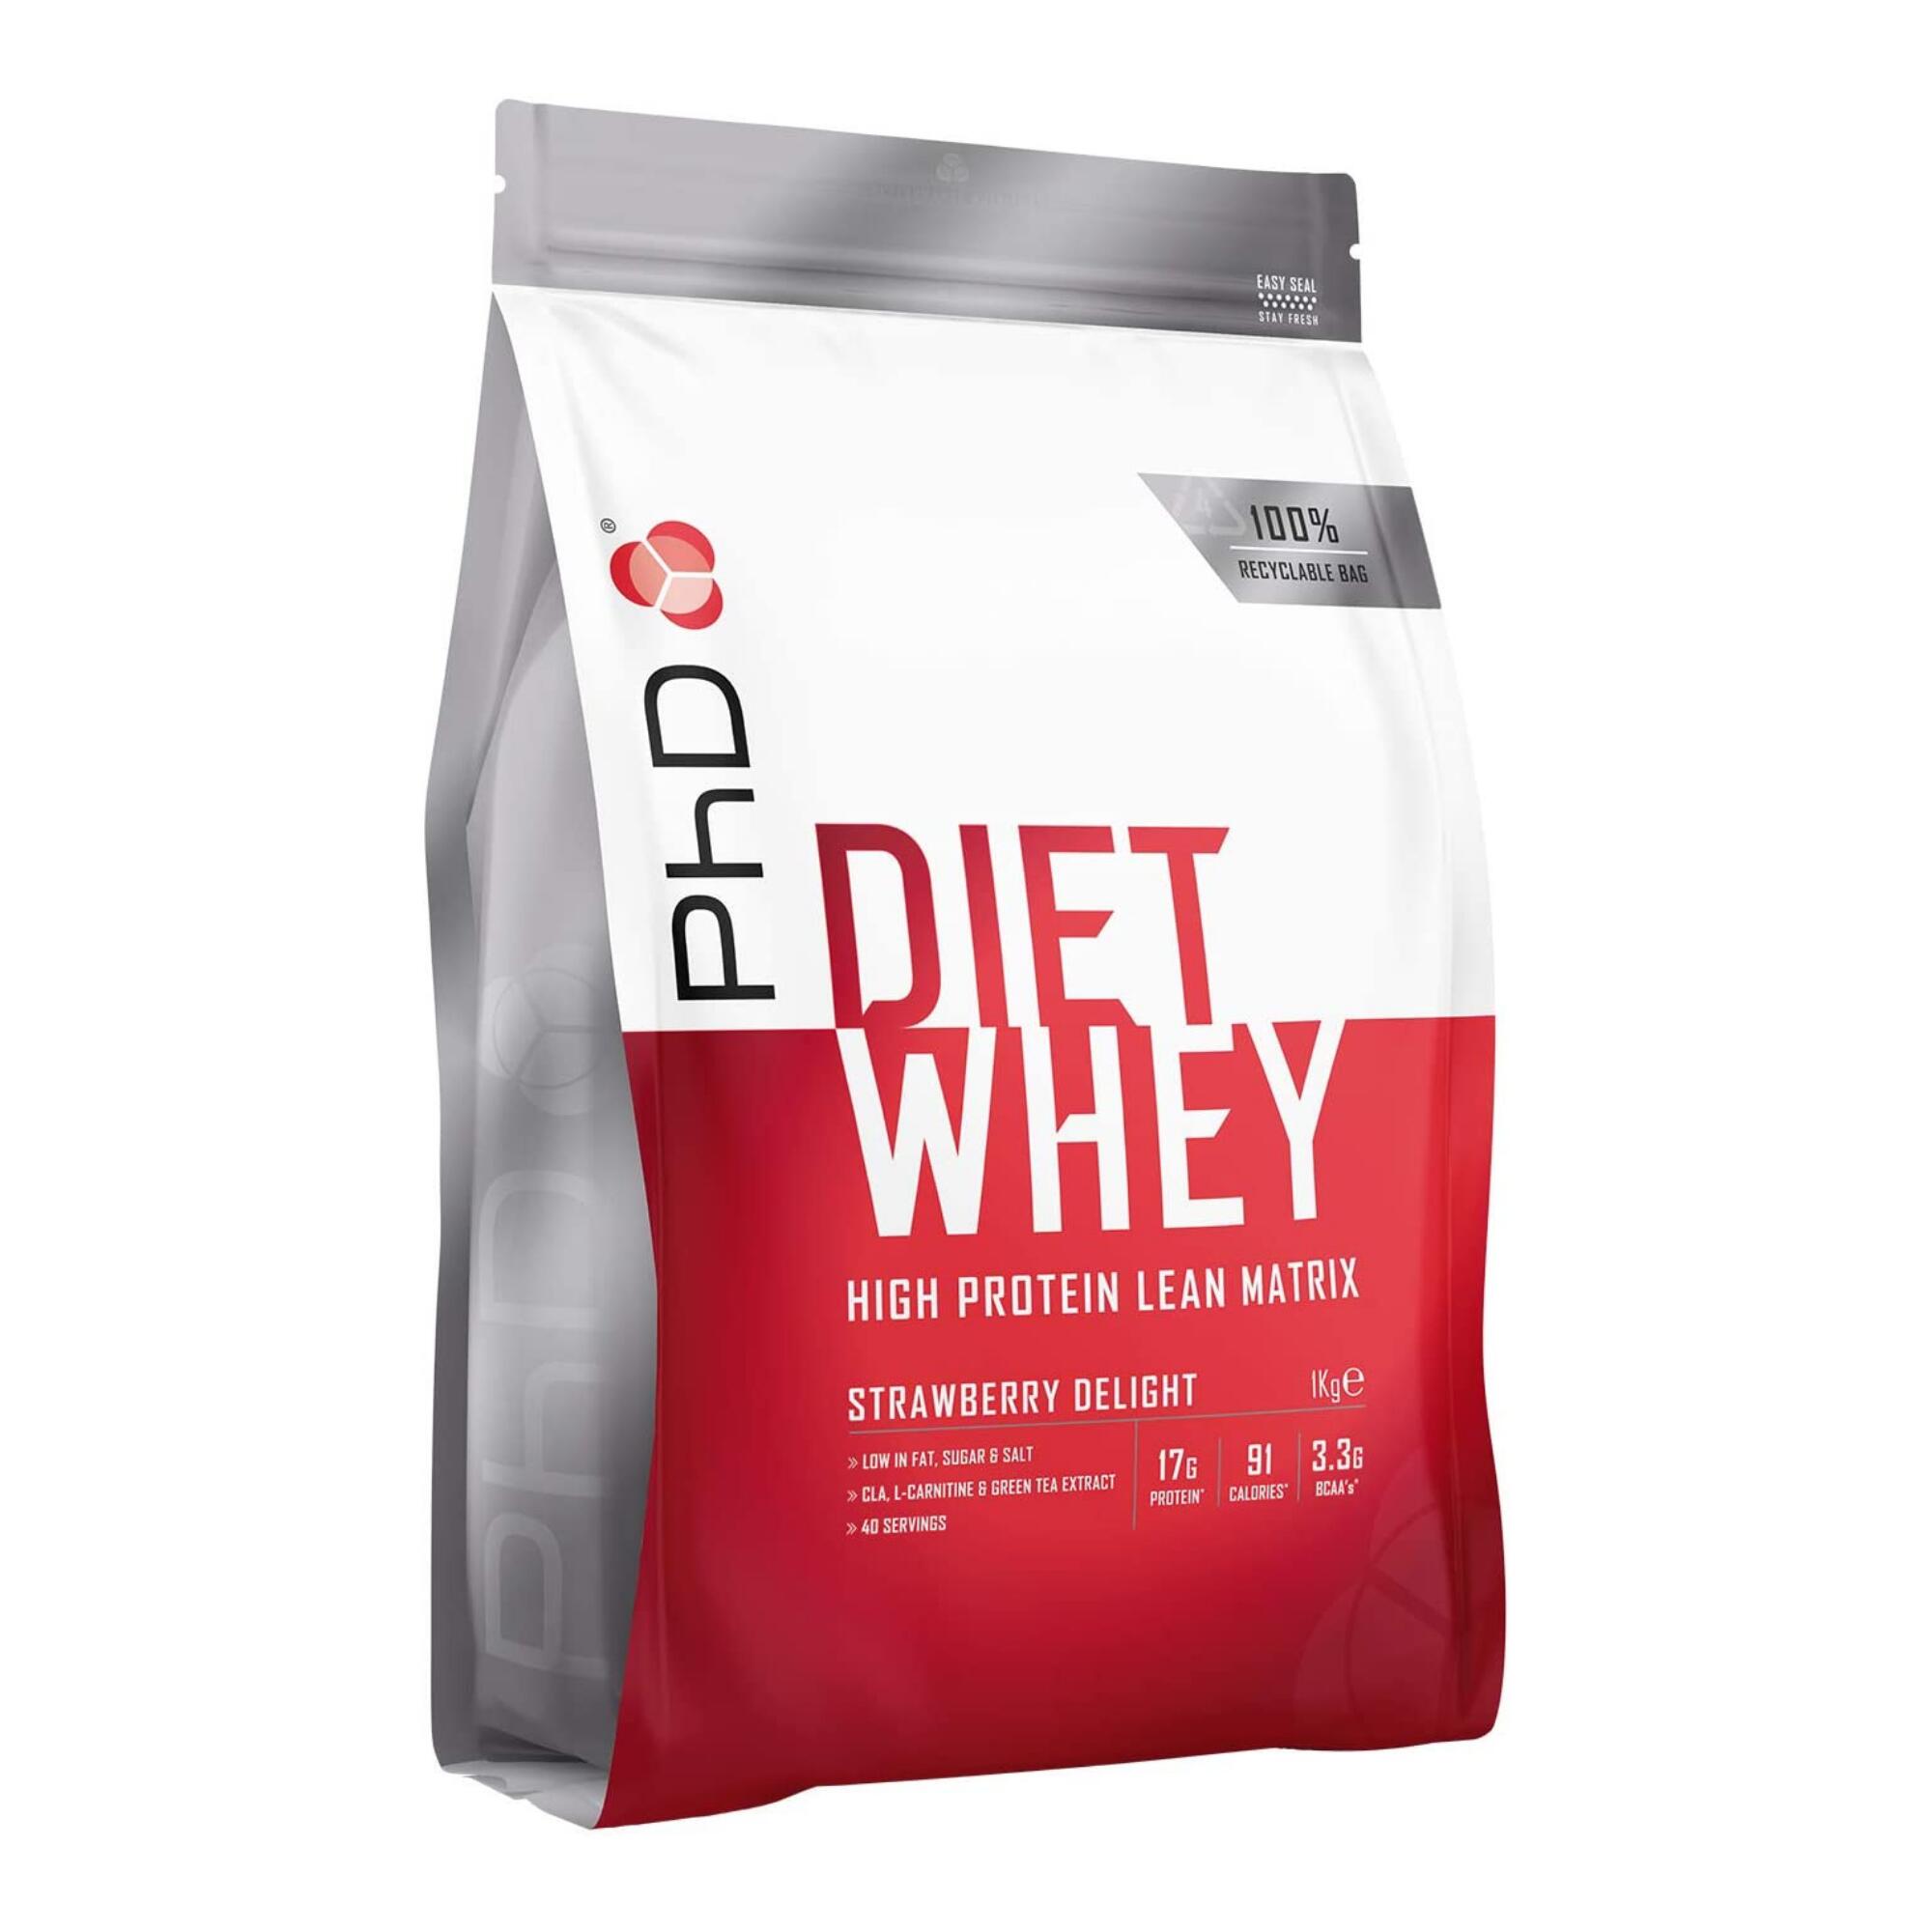 phd diet whey to lose weight